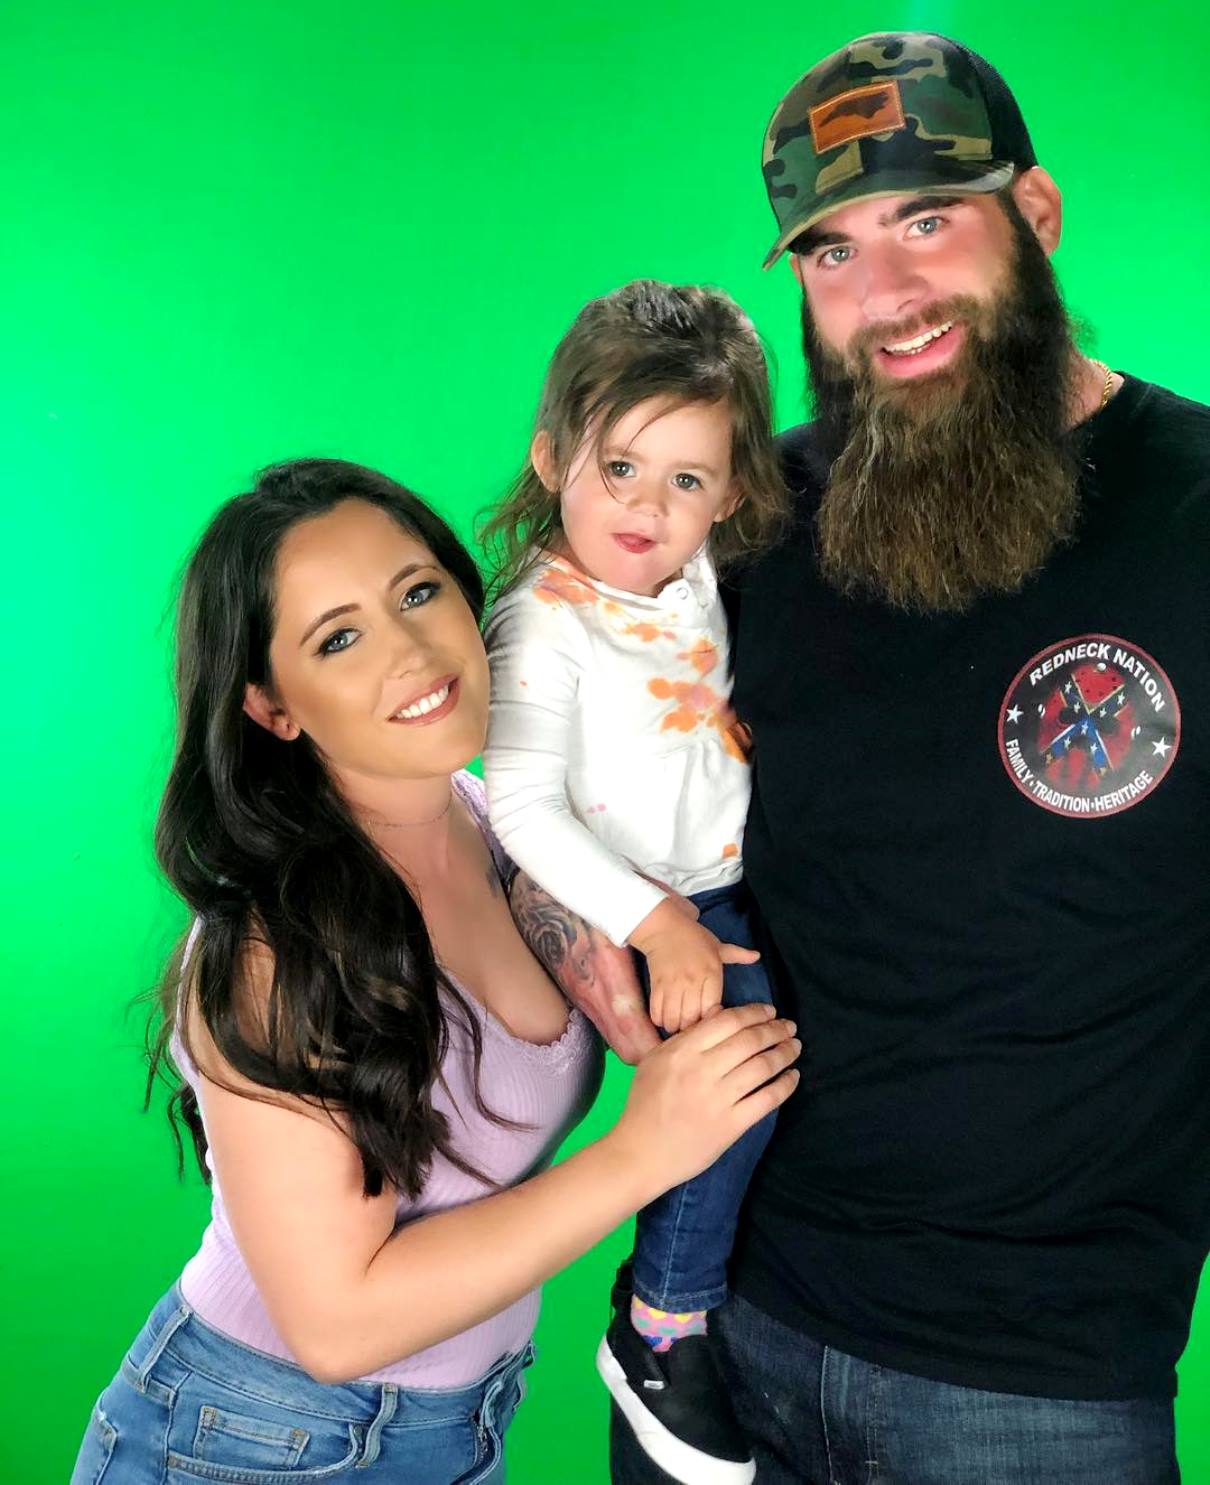 Judge Signs CPS Order to Have Jenelle and David's Daughters Removed From Their Home, Plus Are Teen Mom 2 Stars on the Run From CPS?